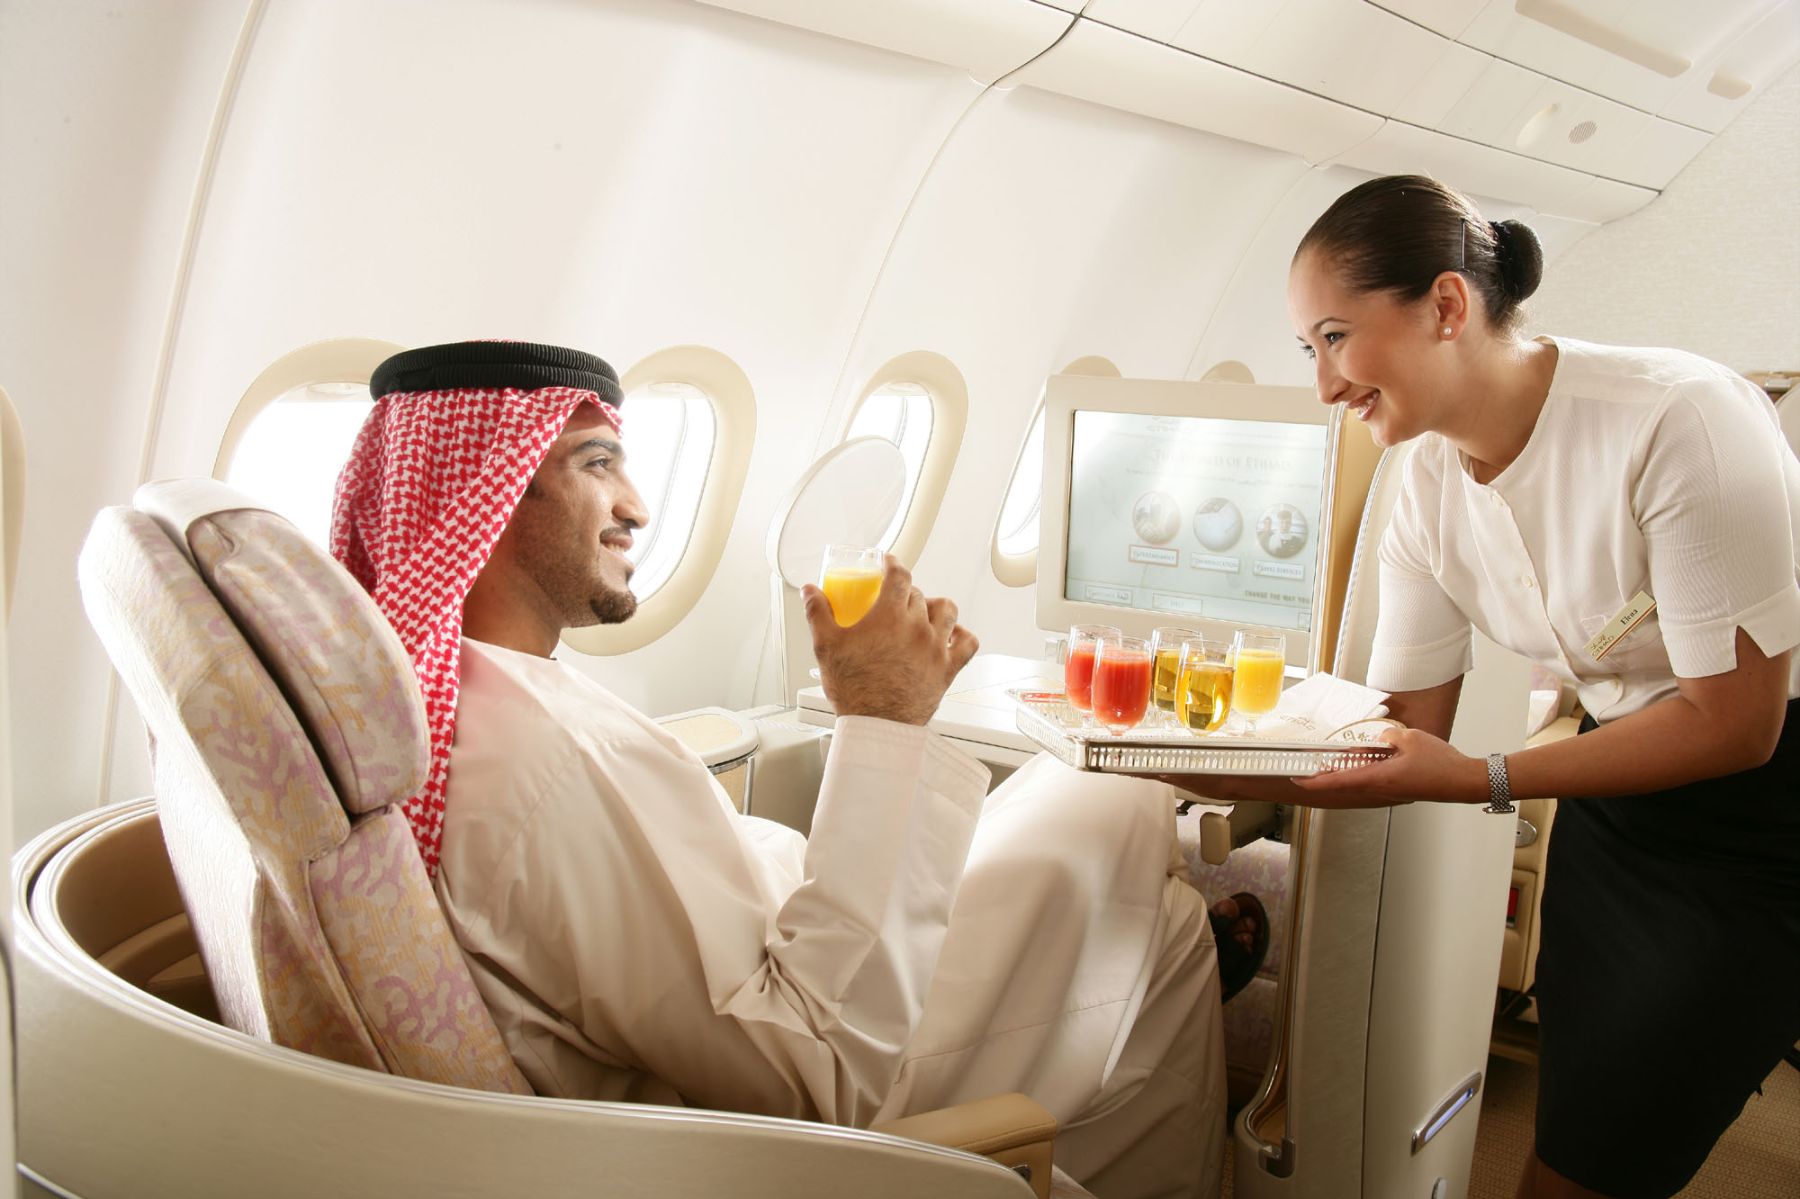 a woman serving drinks to a man in an airplane